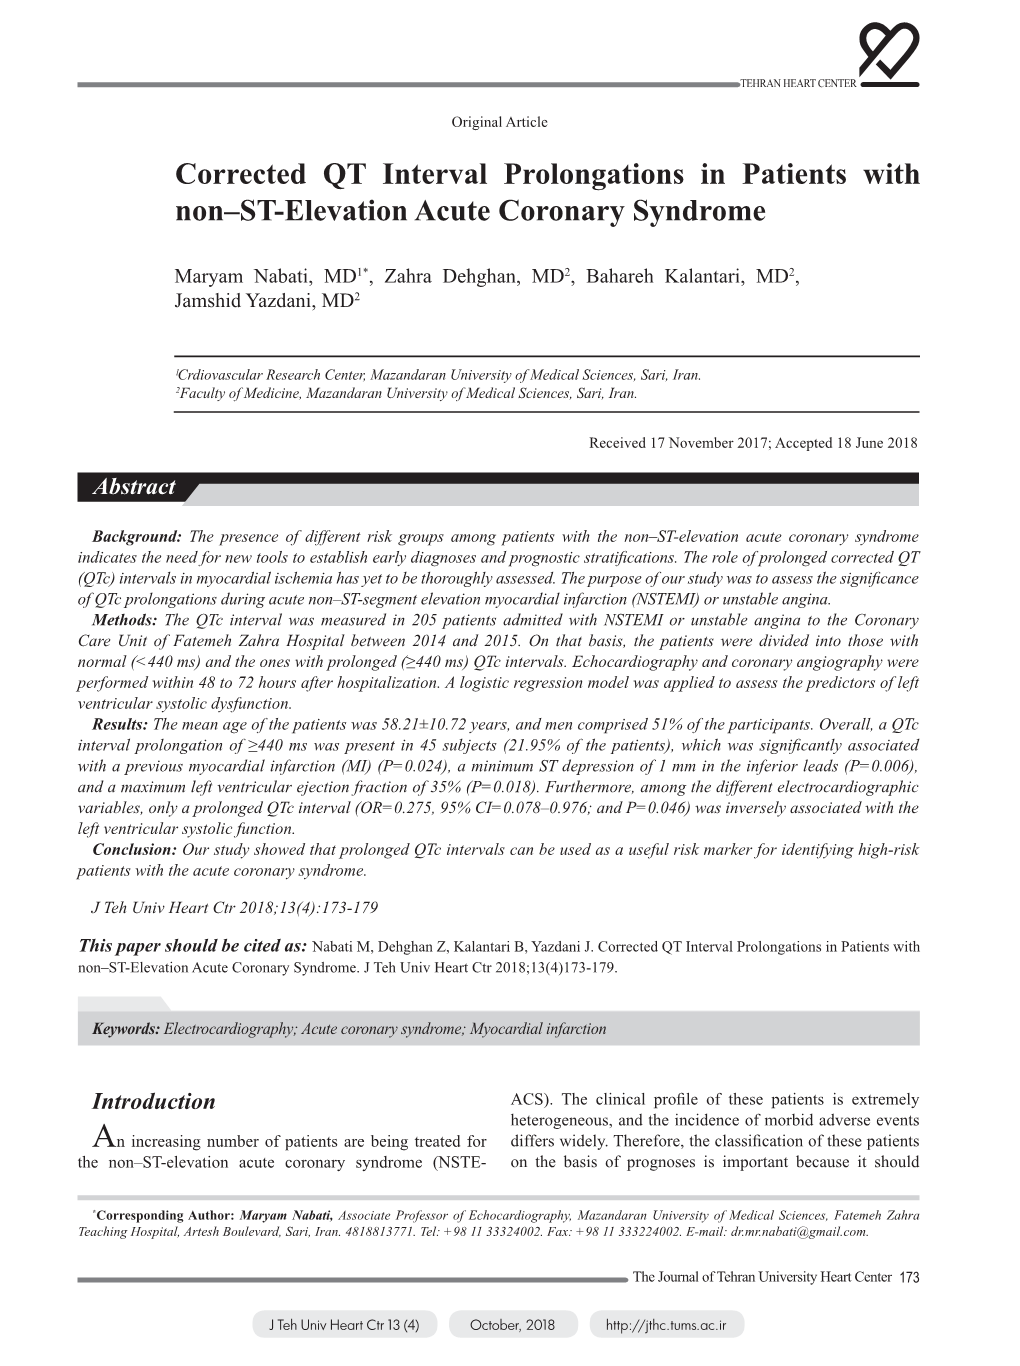 Corrected QT Interval Prolongations in Patients with Non–ST-Elevation Acute Coronary Syndrome